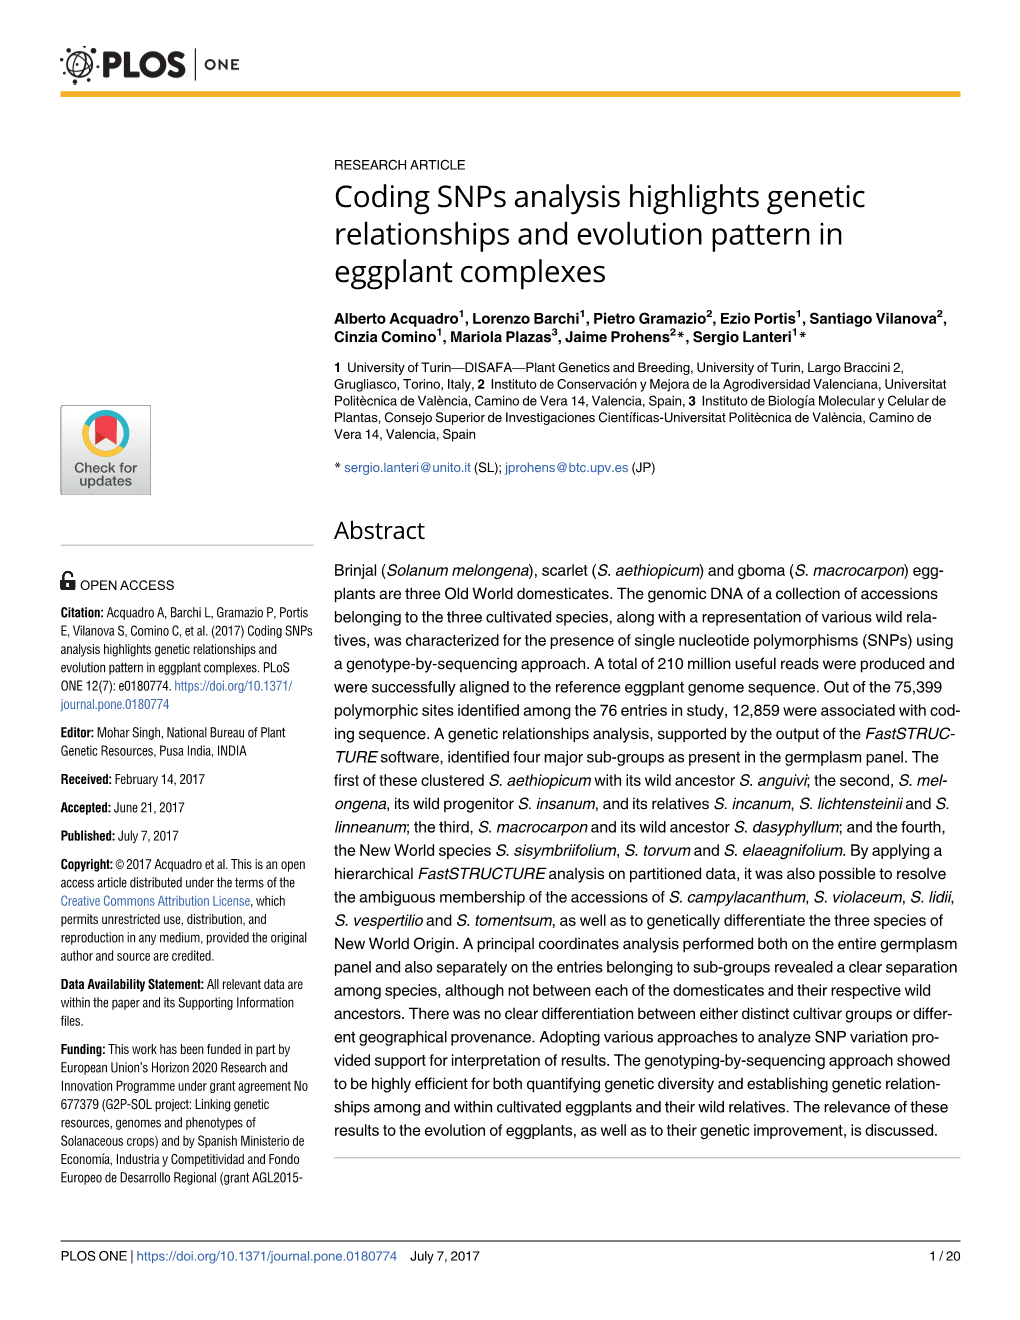 Coding Snps Analysis Highlights Genetic Relationships and Evolution Pattern in Eggplant Complexes